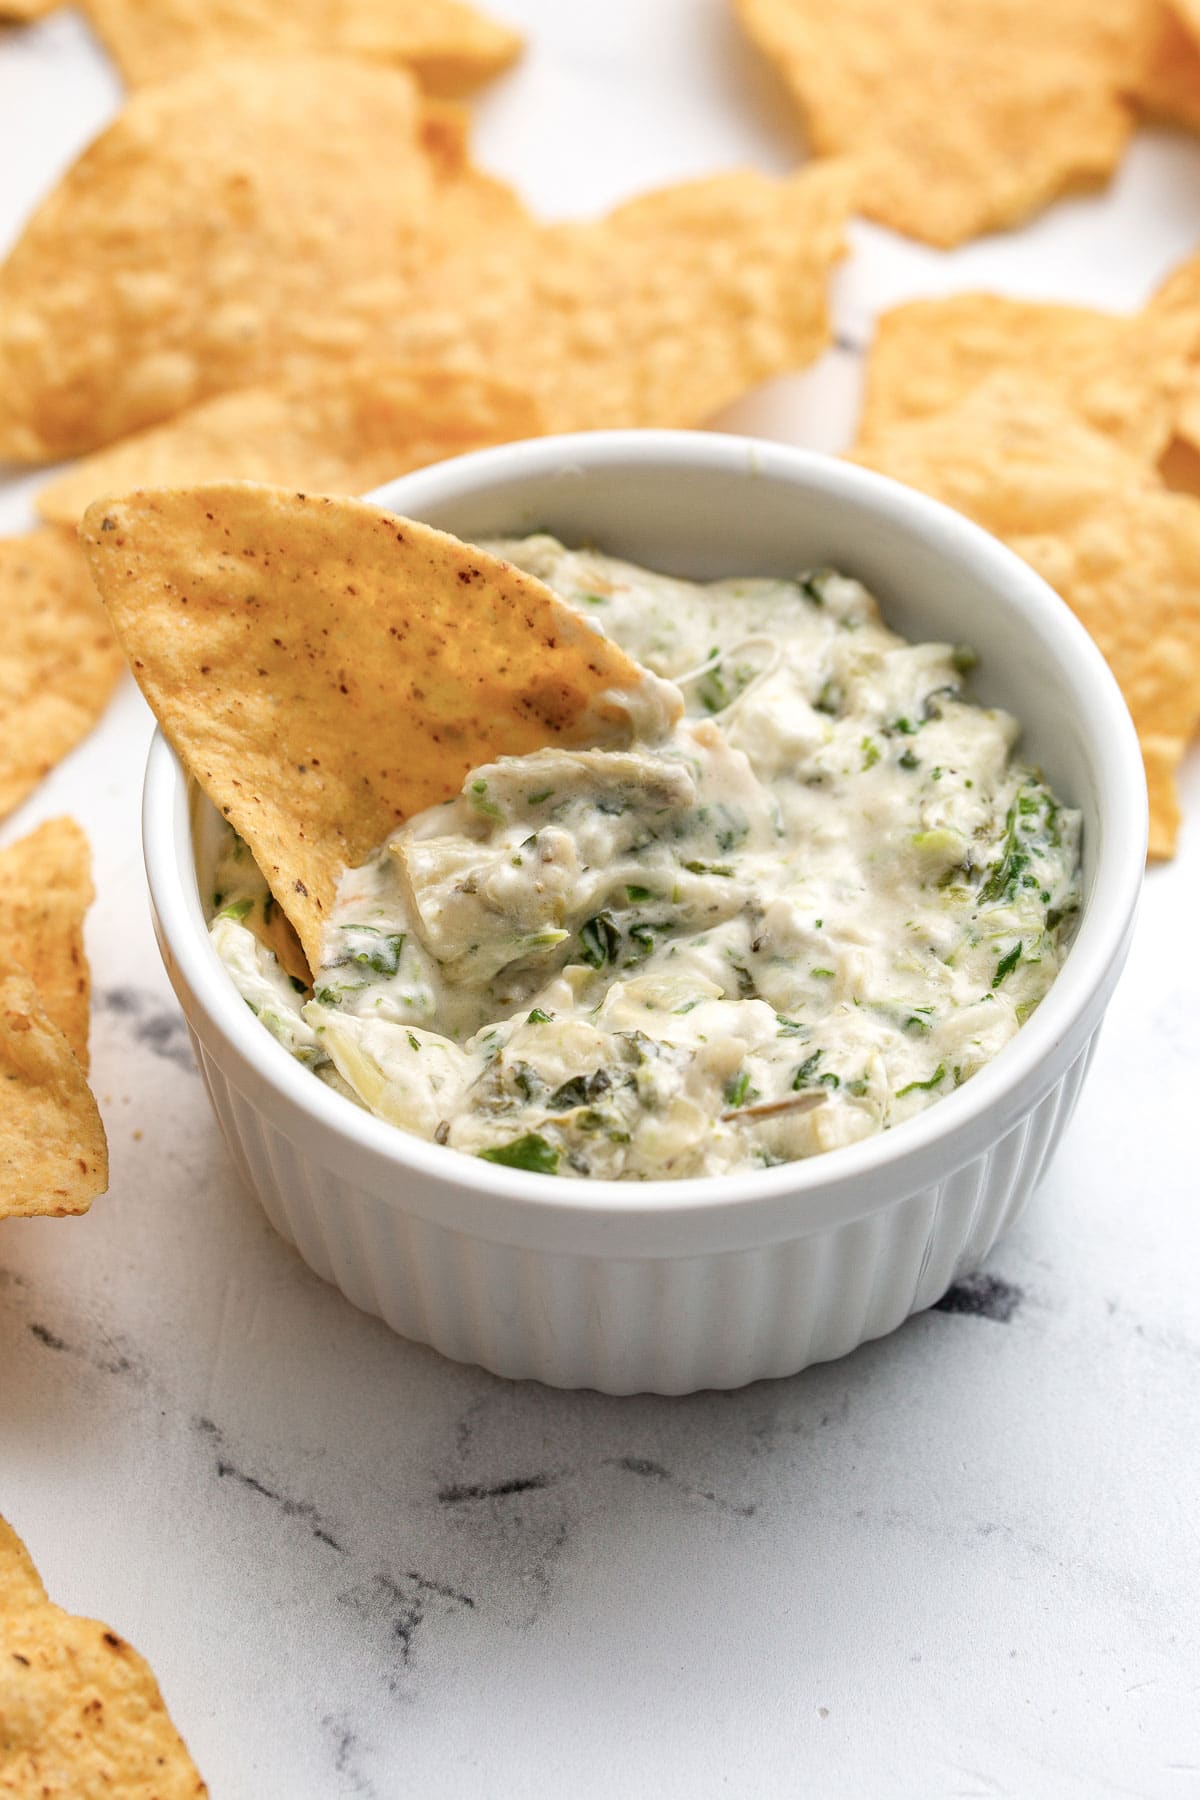 Spinach and artichoke dip in a white ramekin surrounded by tortilla chips.